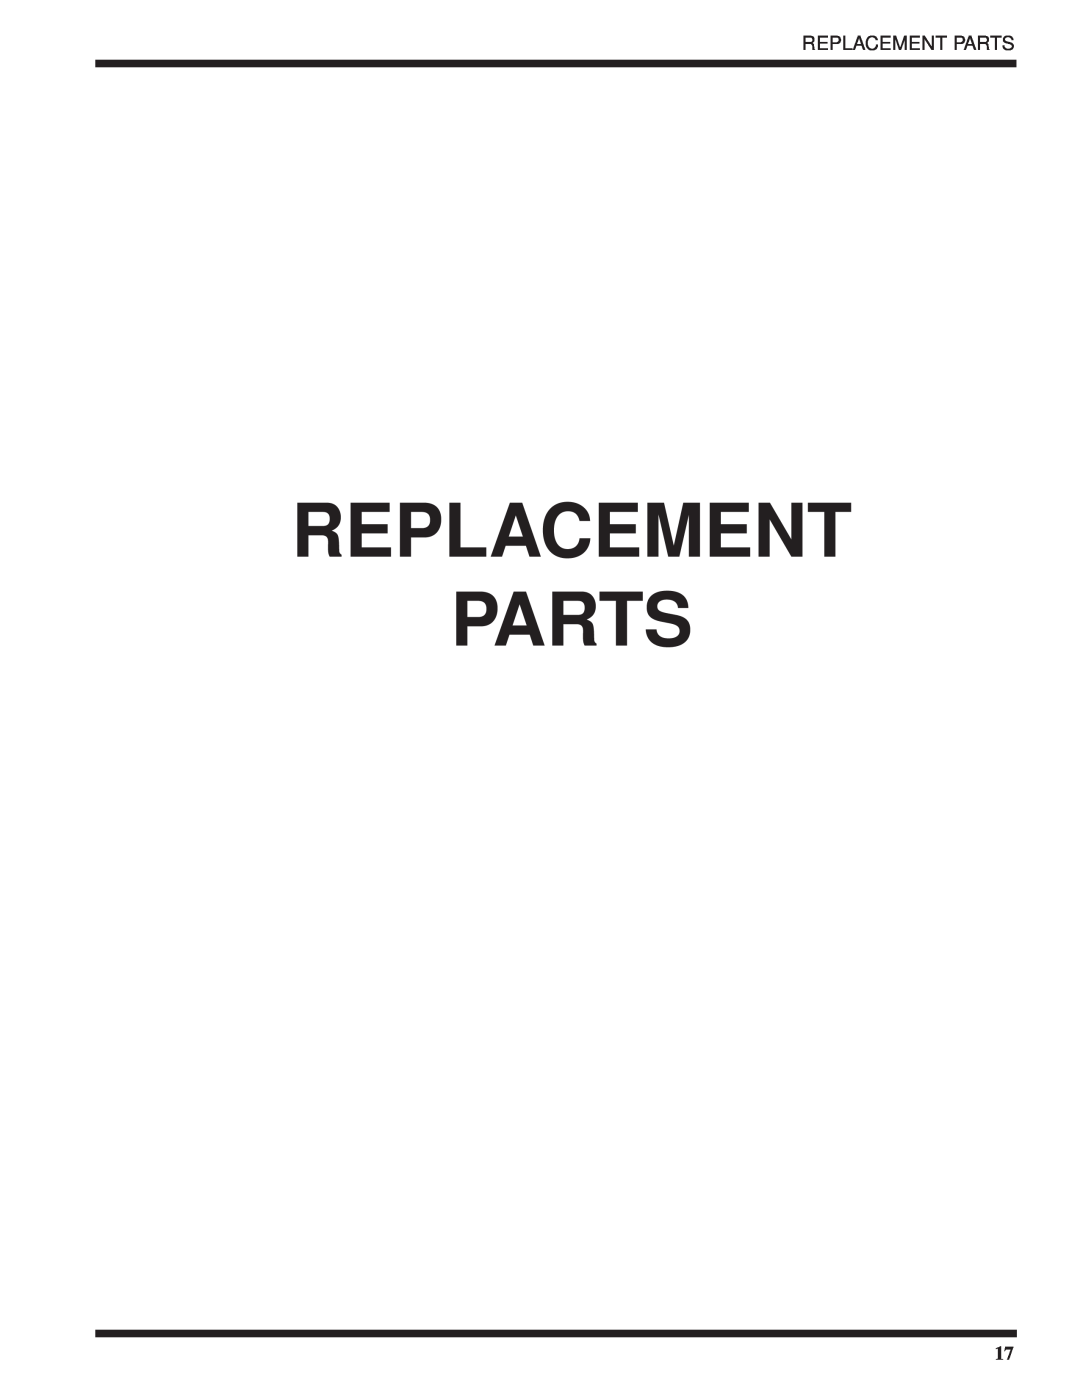 Moyer Diebel DF1-M6, DF-M6, DF2-M6 technical manual Replacement Parts 